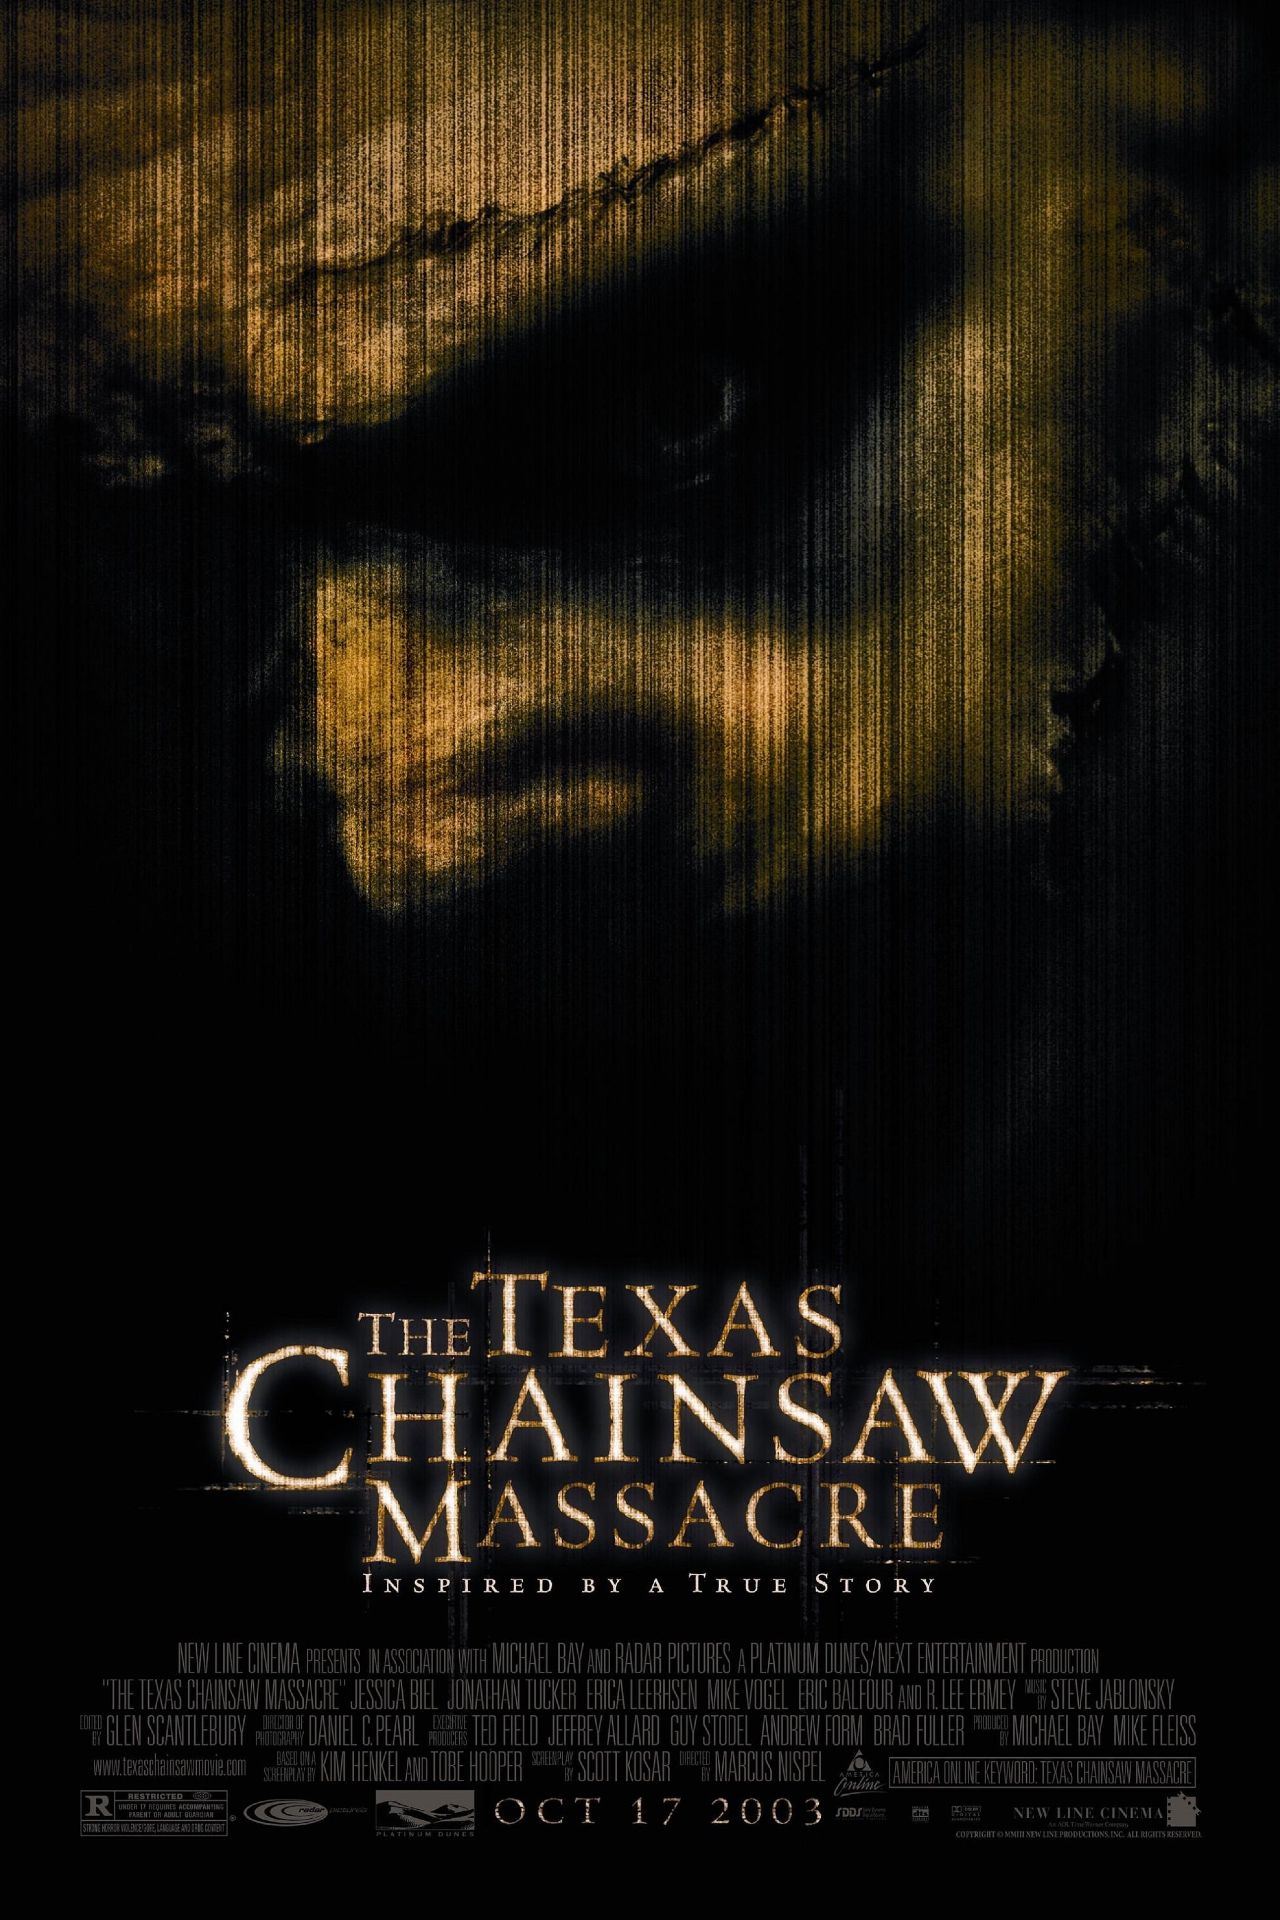 The Texas Chainsaw Massacre 2003 Movie Poster